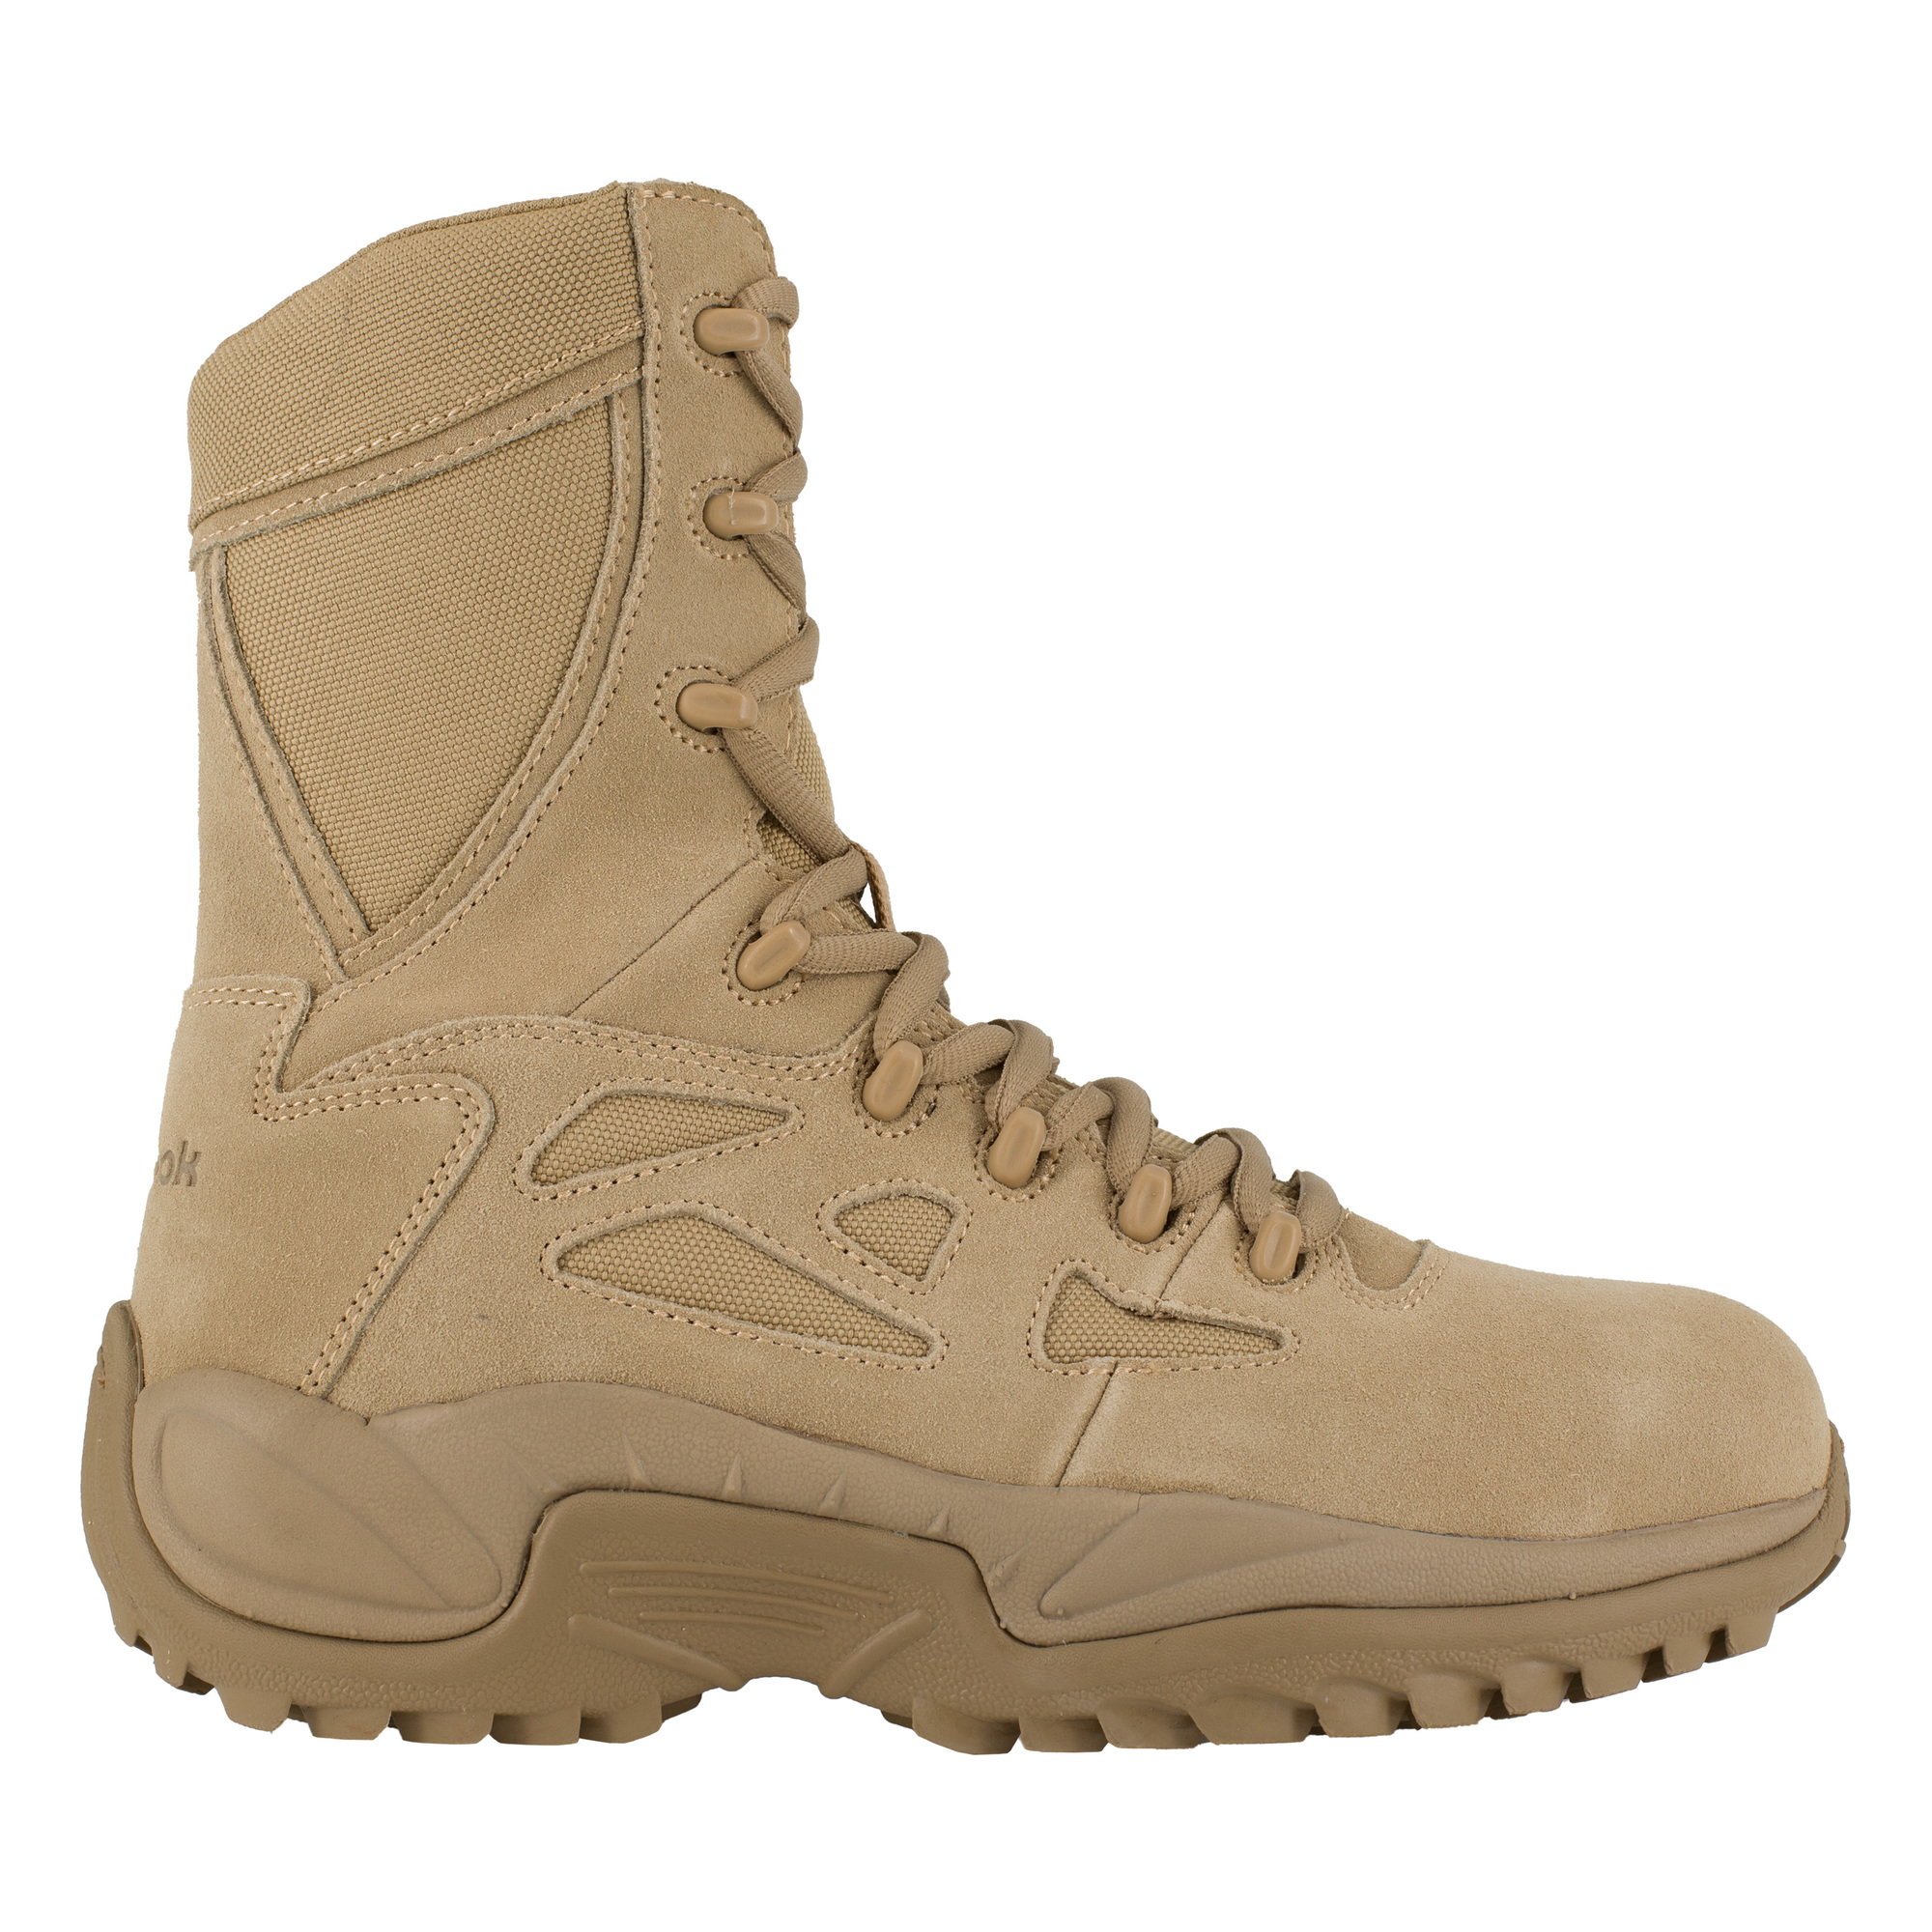 Reebok, 8Inch Stealth Tactical Boot with Side Zipper, Size 5, Width Medium, Color Desert Tan, Model RB894 -  RB894-M-05.0